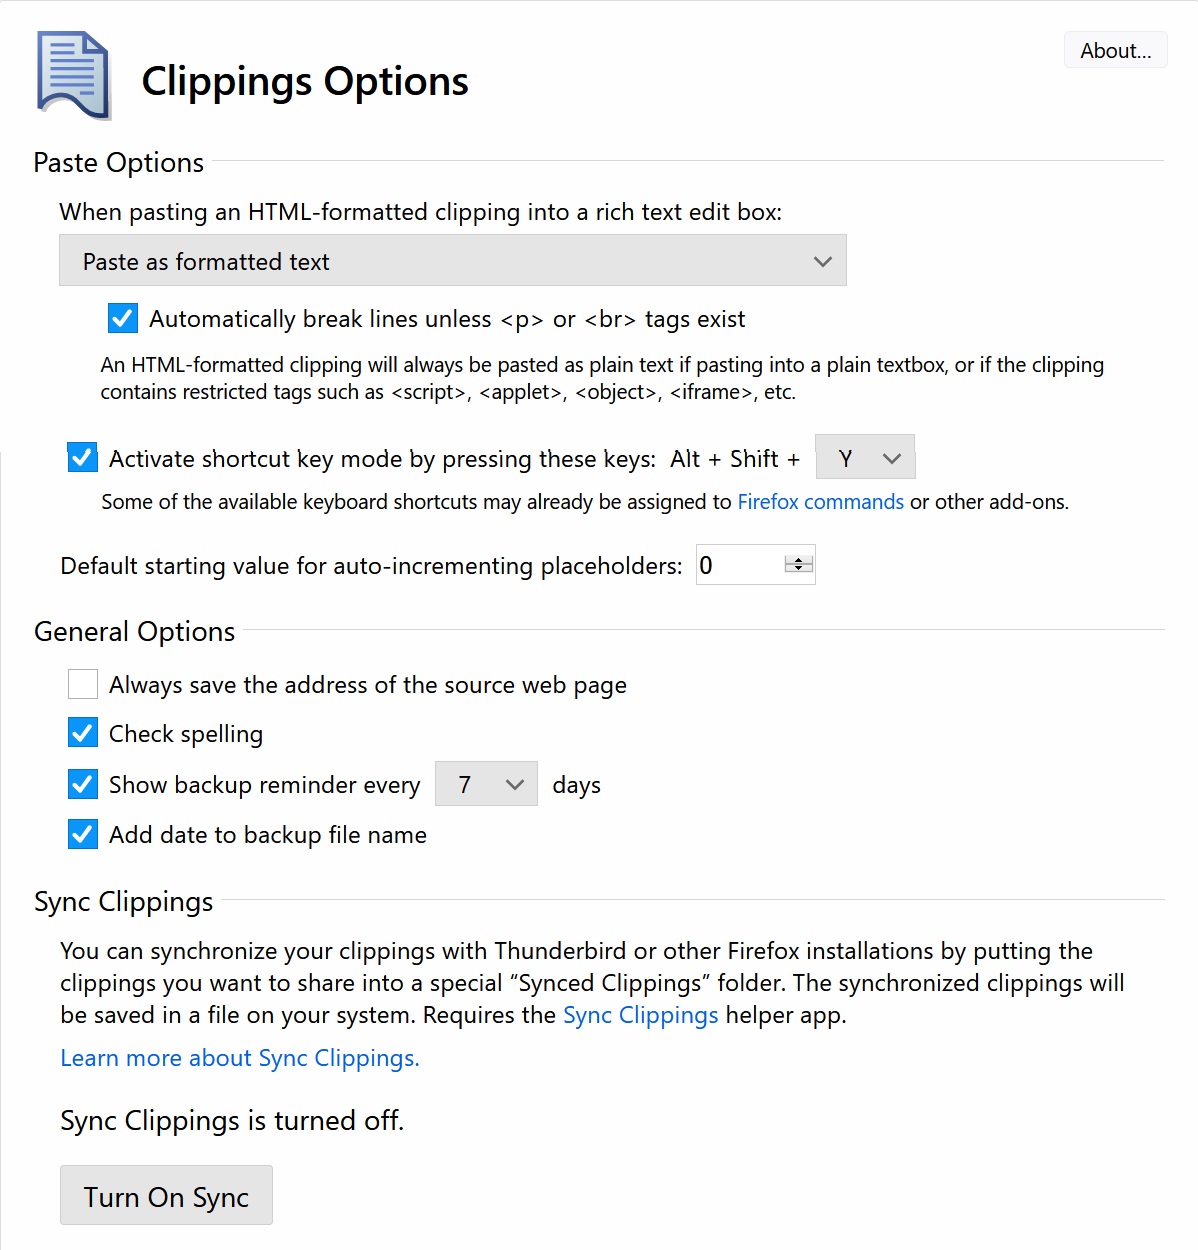 Clippings 6.2 : Options